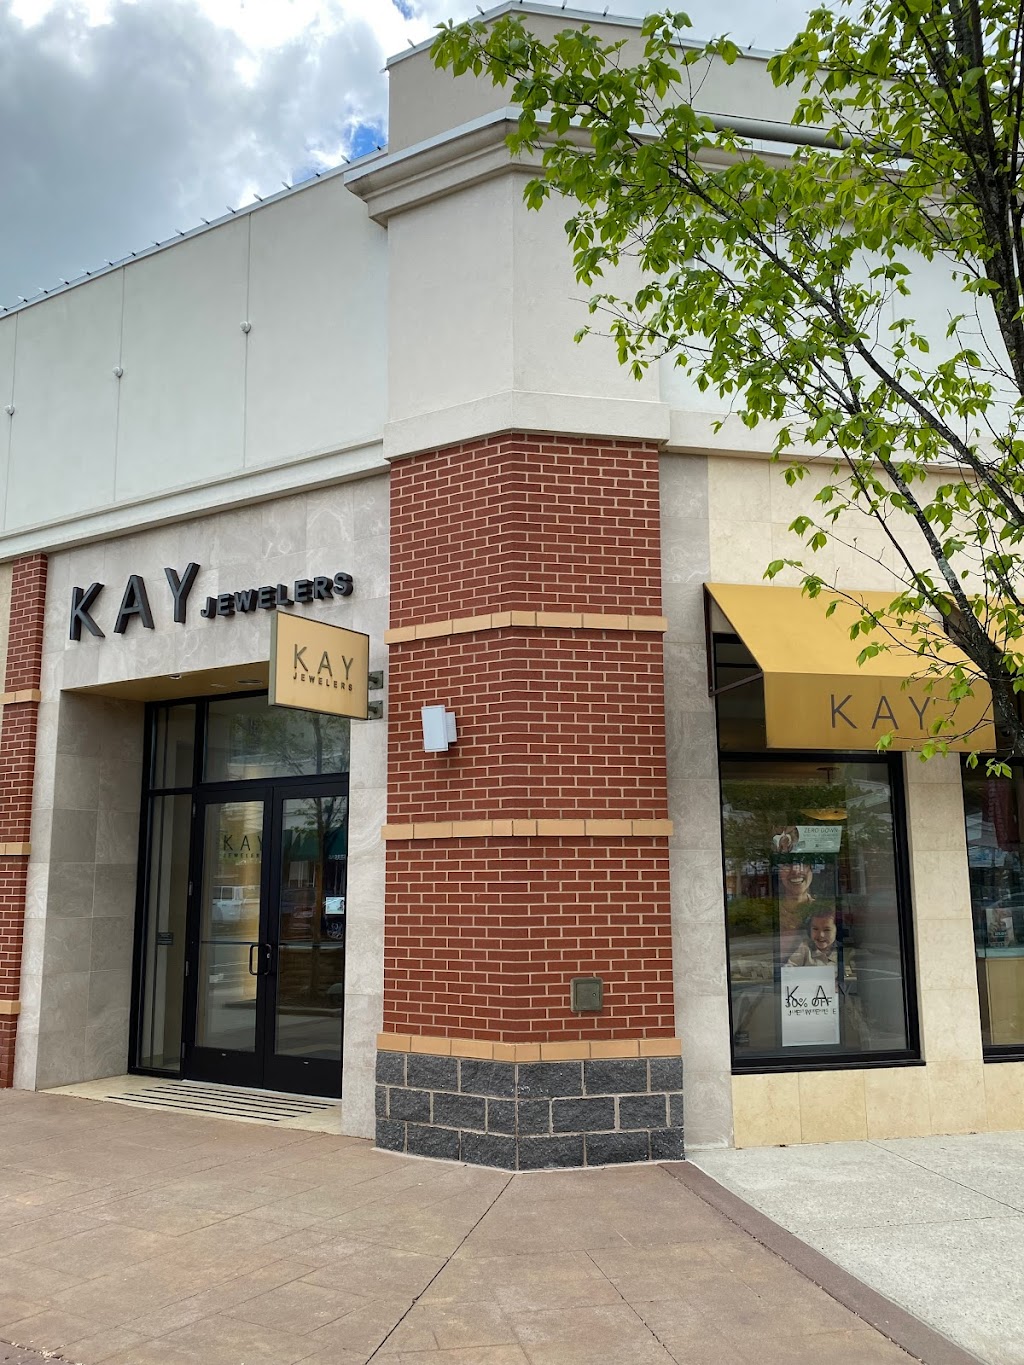 KAY Jewelers | 2960 Center Valley Pkwy #718, Center Valley, PA 18034 | Phone: (610) 797-1460